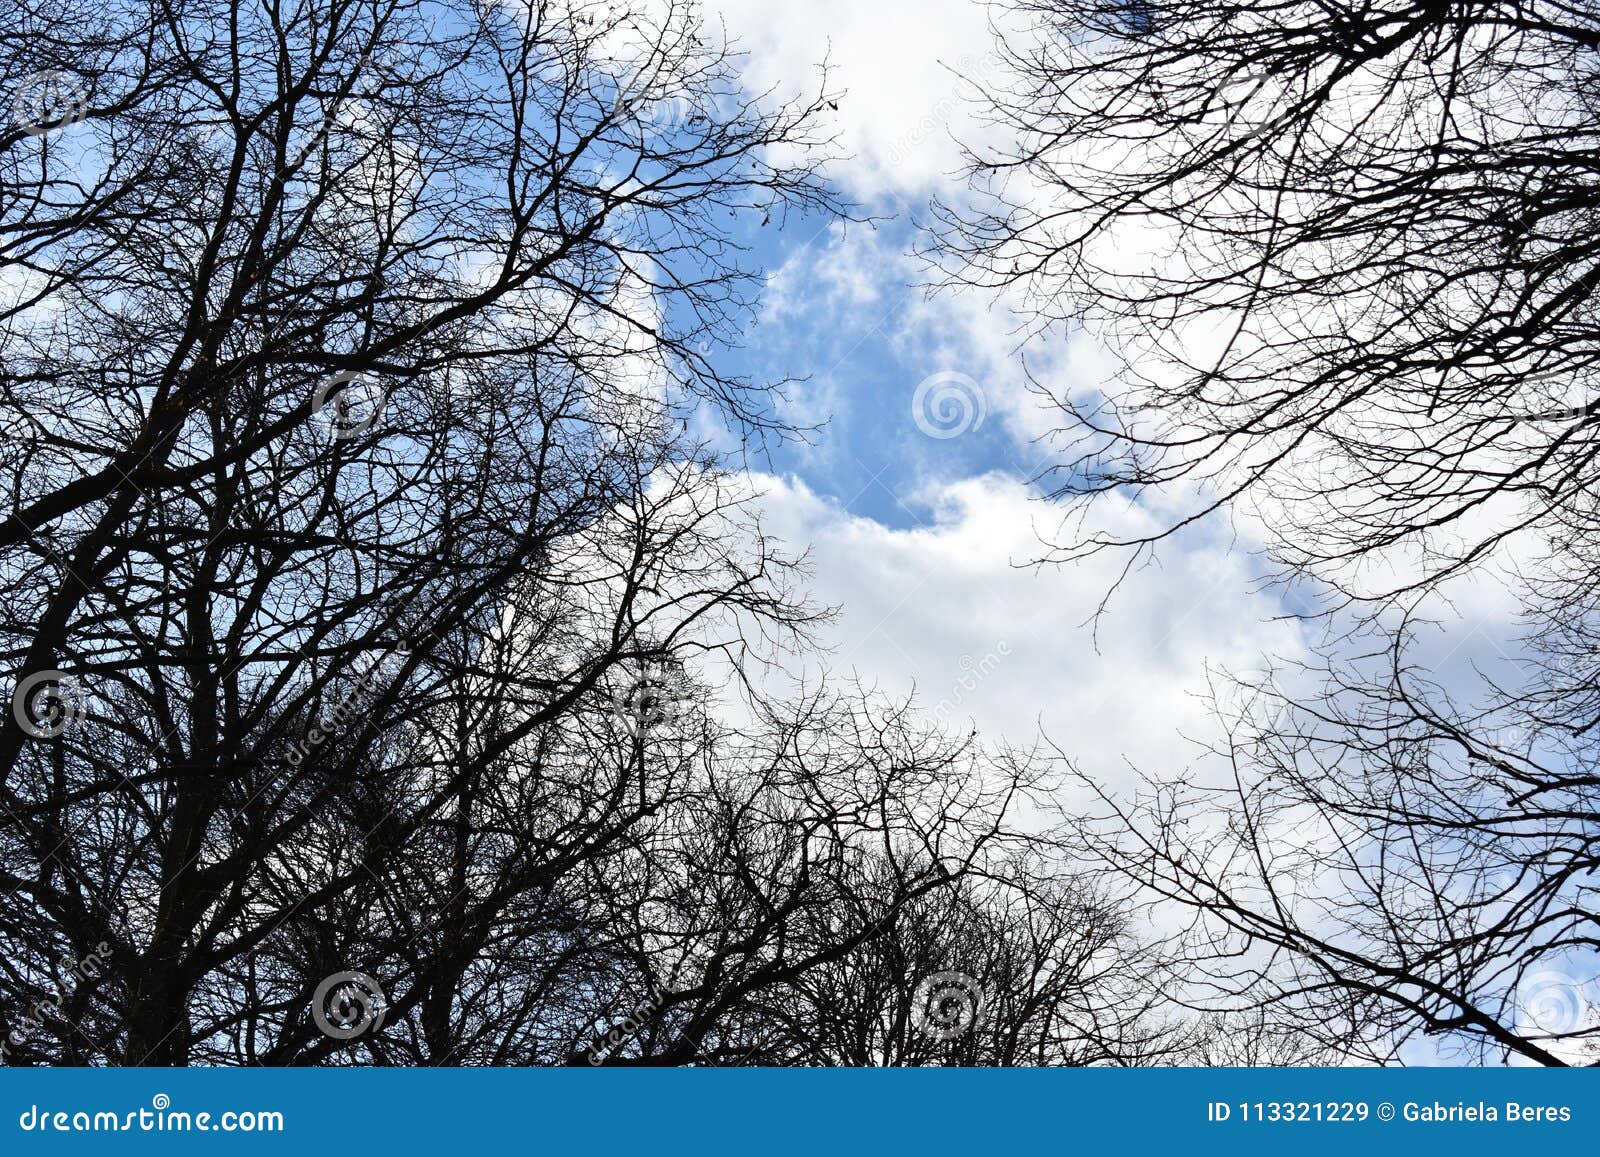 Bare Tree Branches Against Blue Sky Stock Image - Image of garden ...